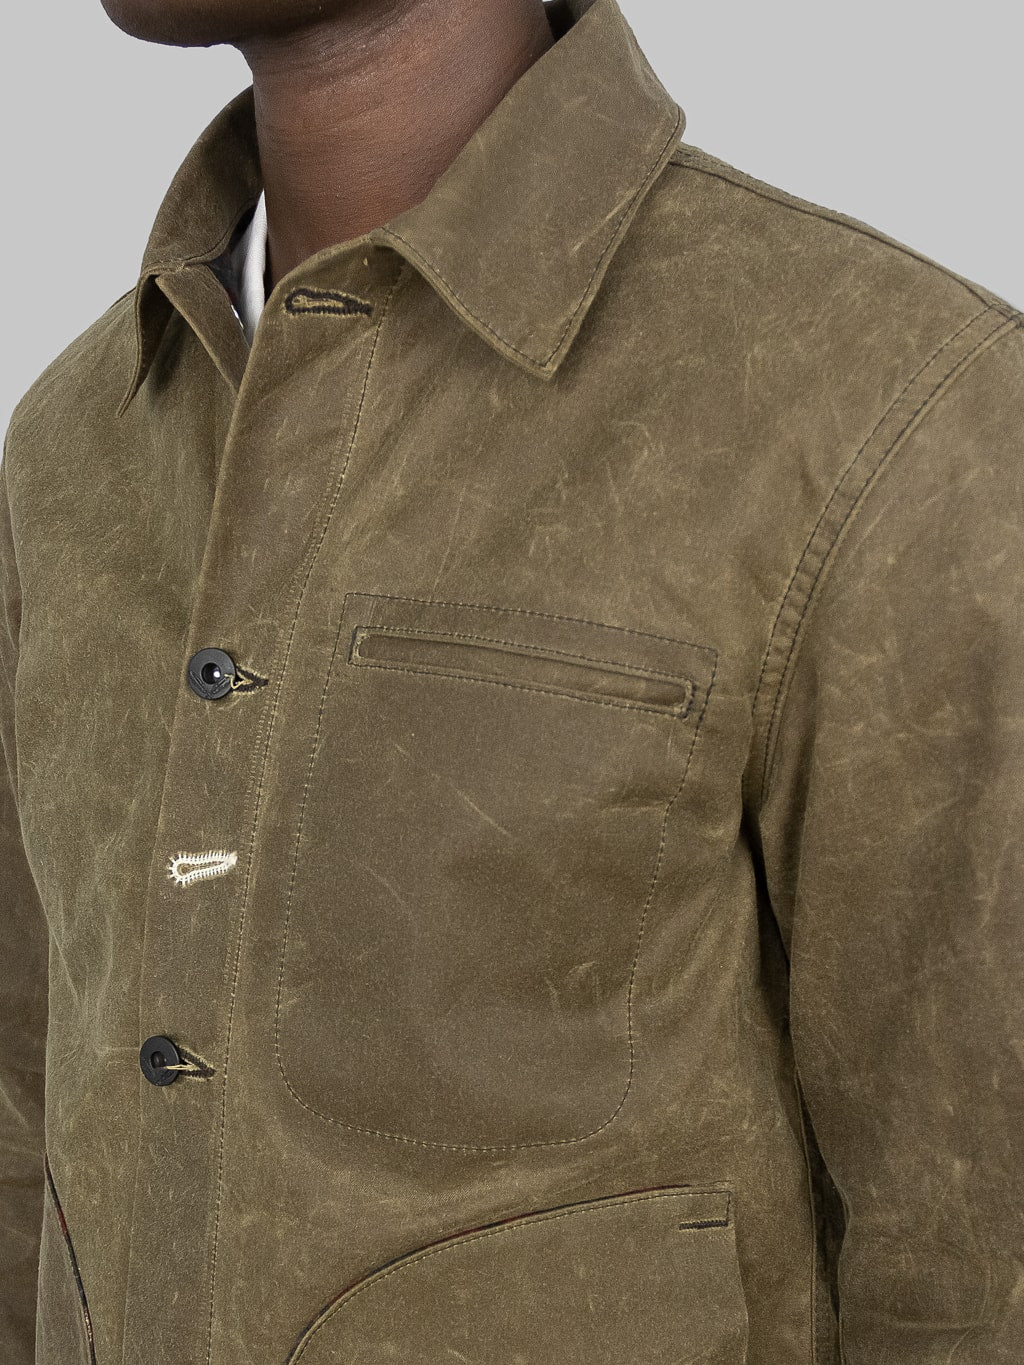 Rogue Territory Supply Jacket Lined Brown Ridgeline chest pocket